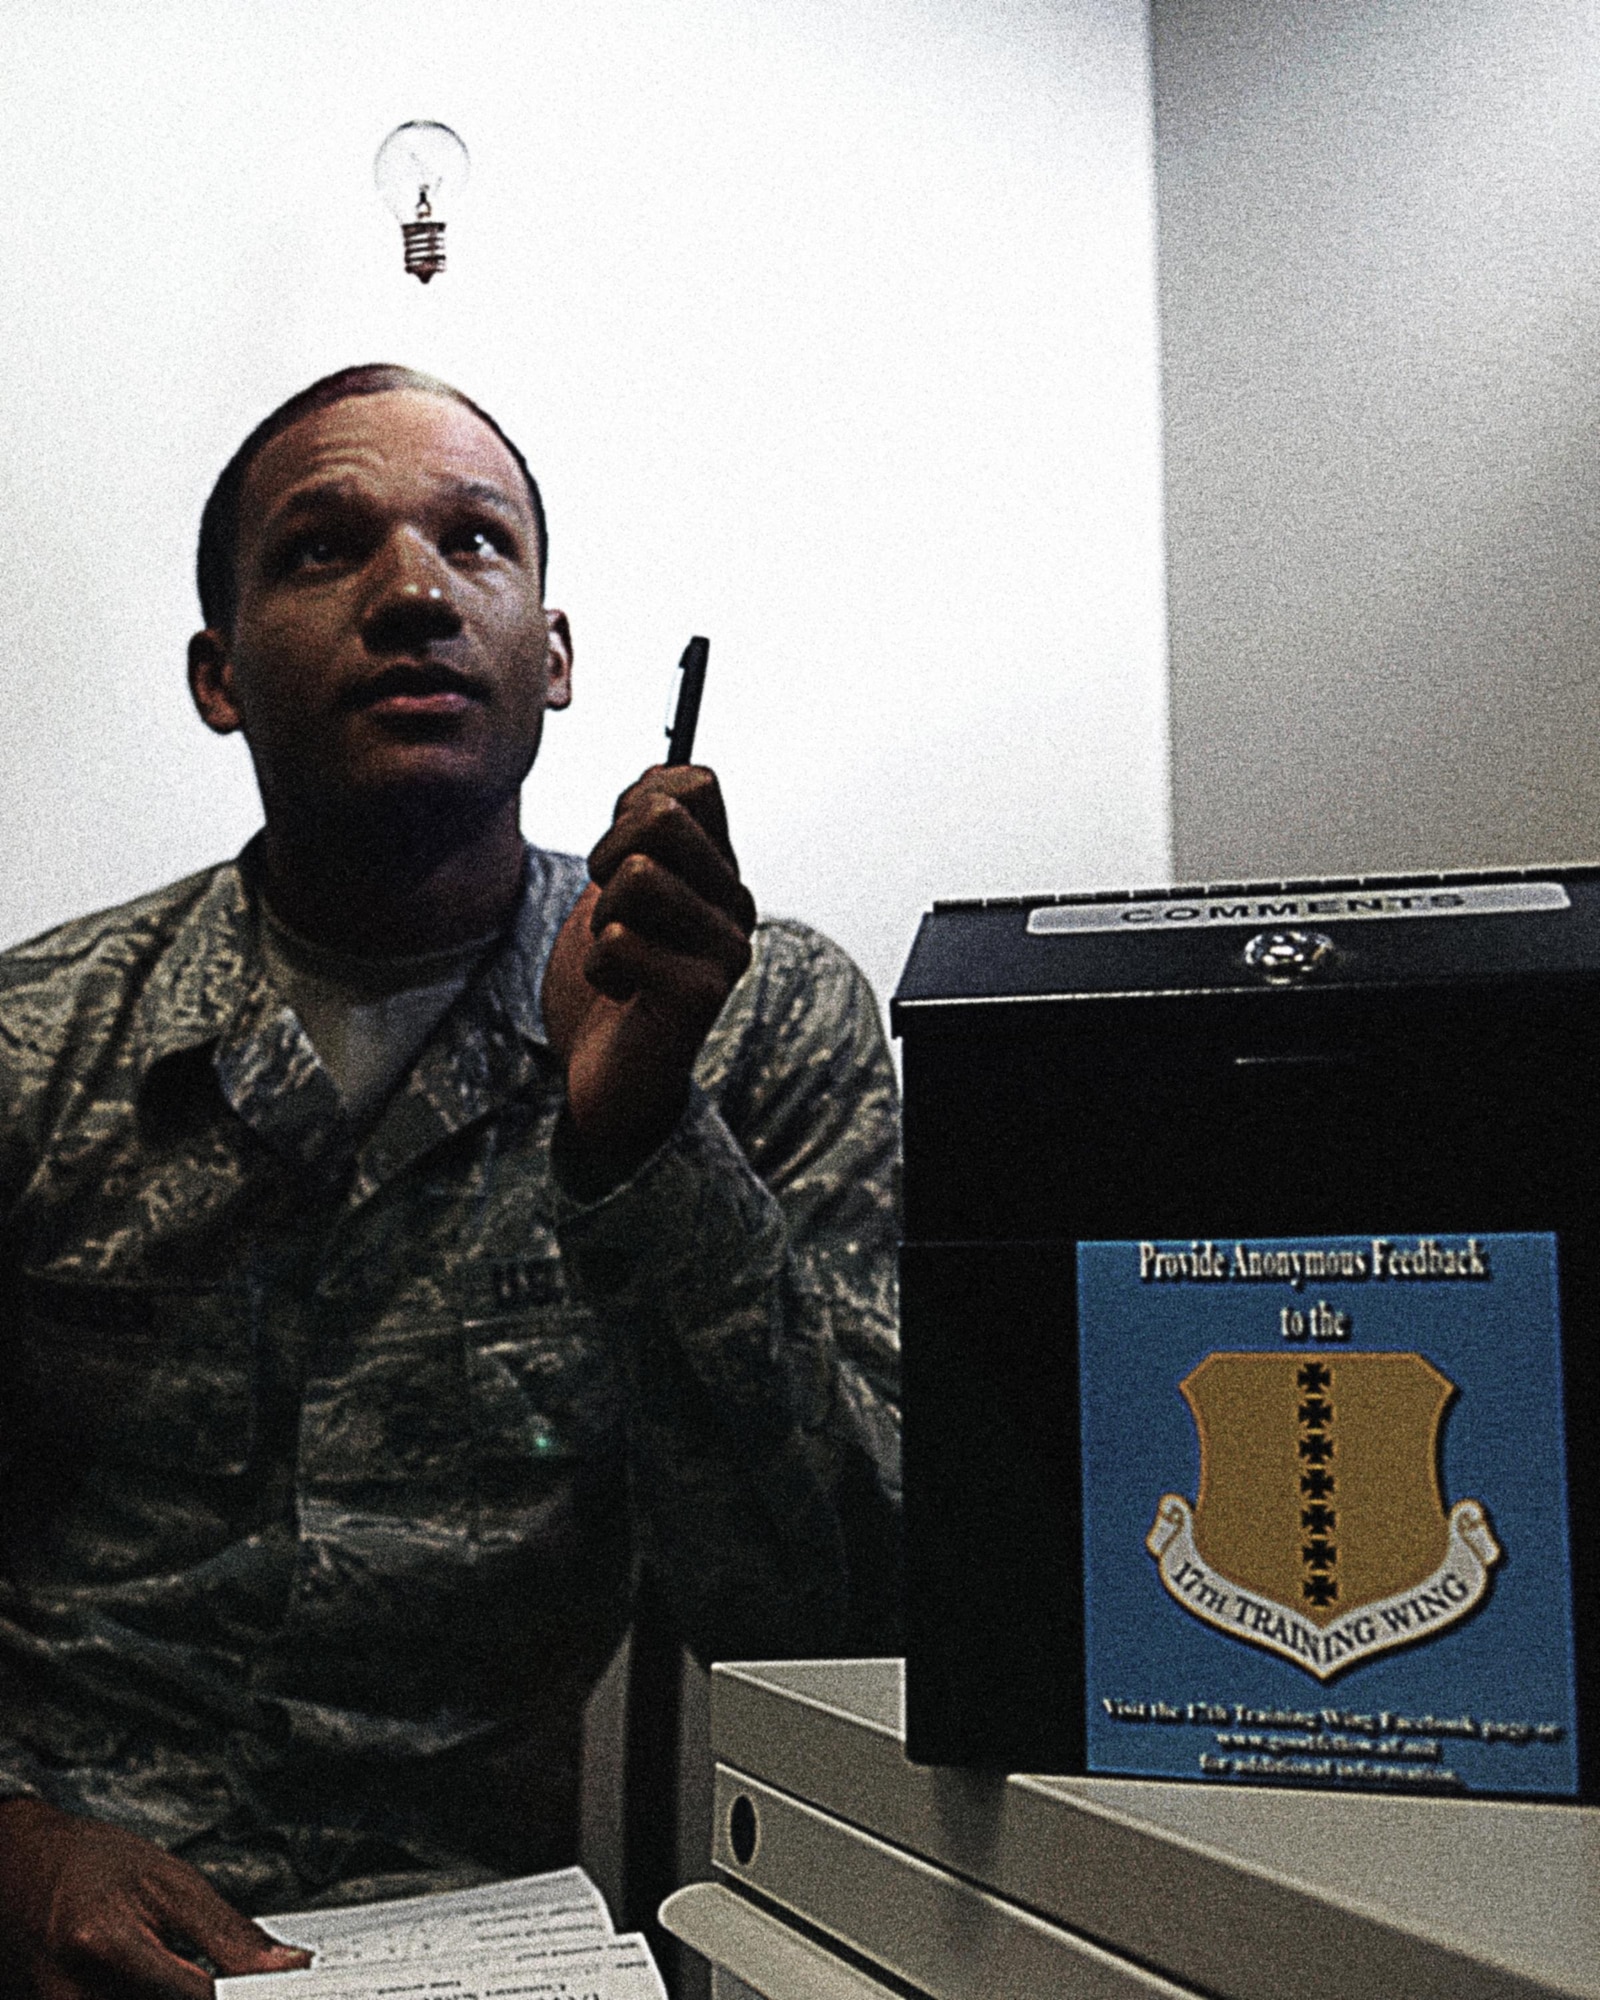 Comment boxes are located at various locations on Goodfellow Air Force Base for the purpose of empowering Airmen to provide anonymous feedback encouraging an environment of innovation, agility and professionalism. (U.S. Air Force Illustration by Tech. Sgt. Austin Knox/Released)